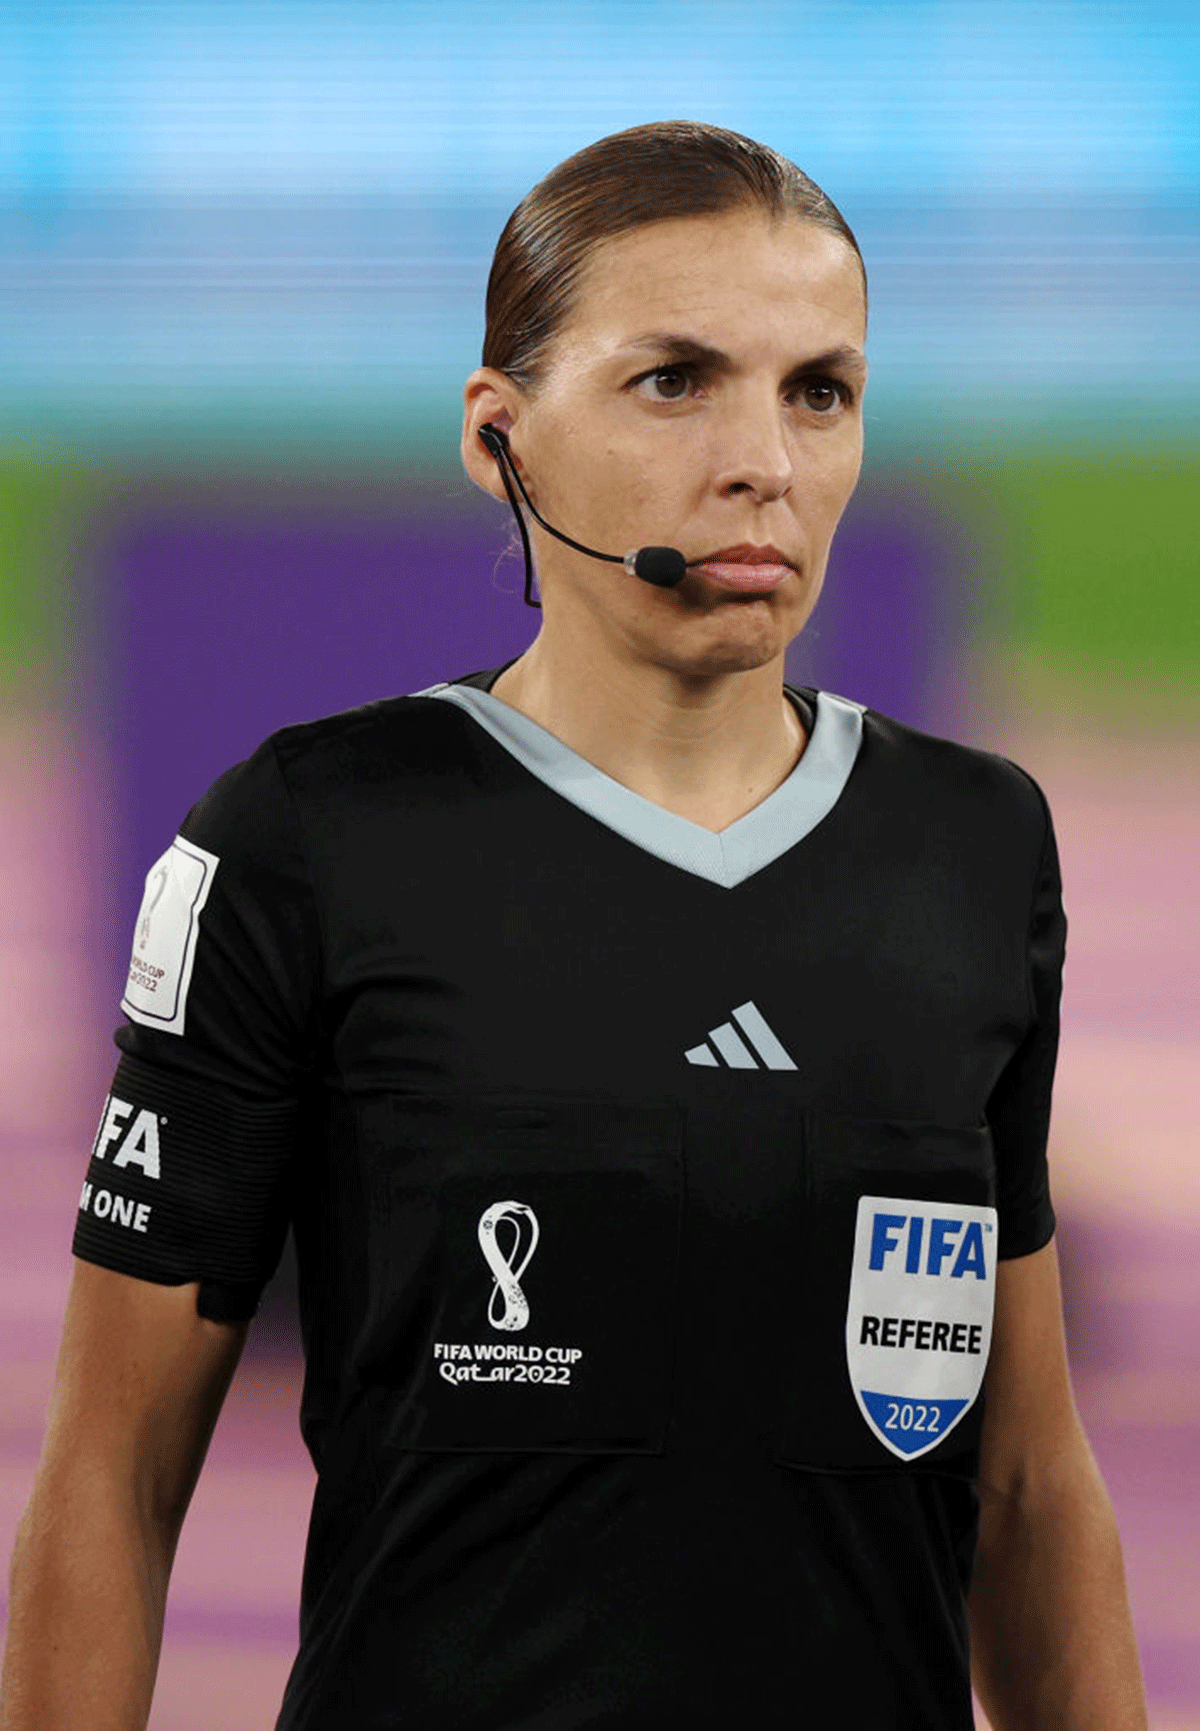 Fourth official Stéphanie Frappart during the FIFA World Cup Group C match between Mexico and Poland at Stadium 974 in Doha, Qatar, on Tuesday